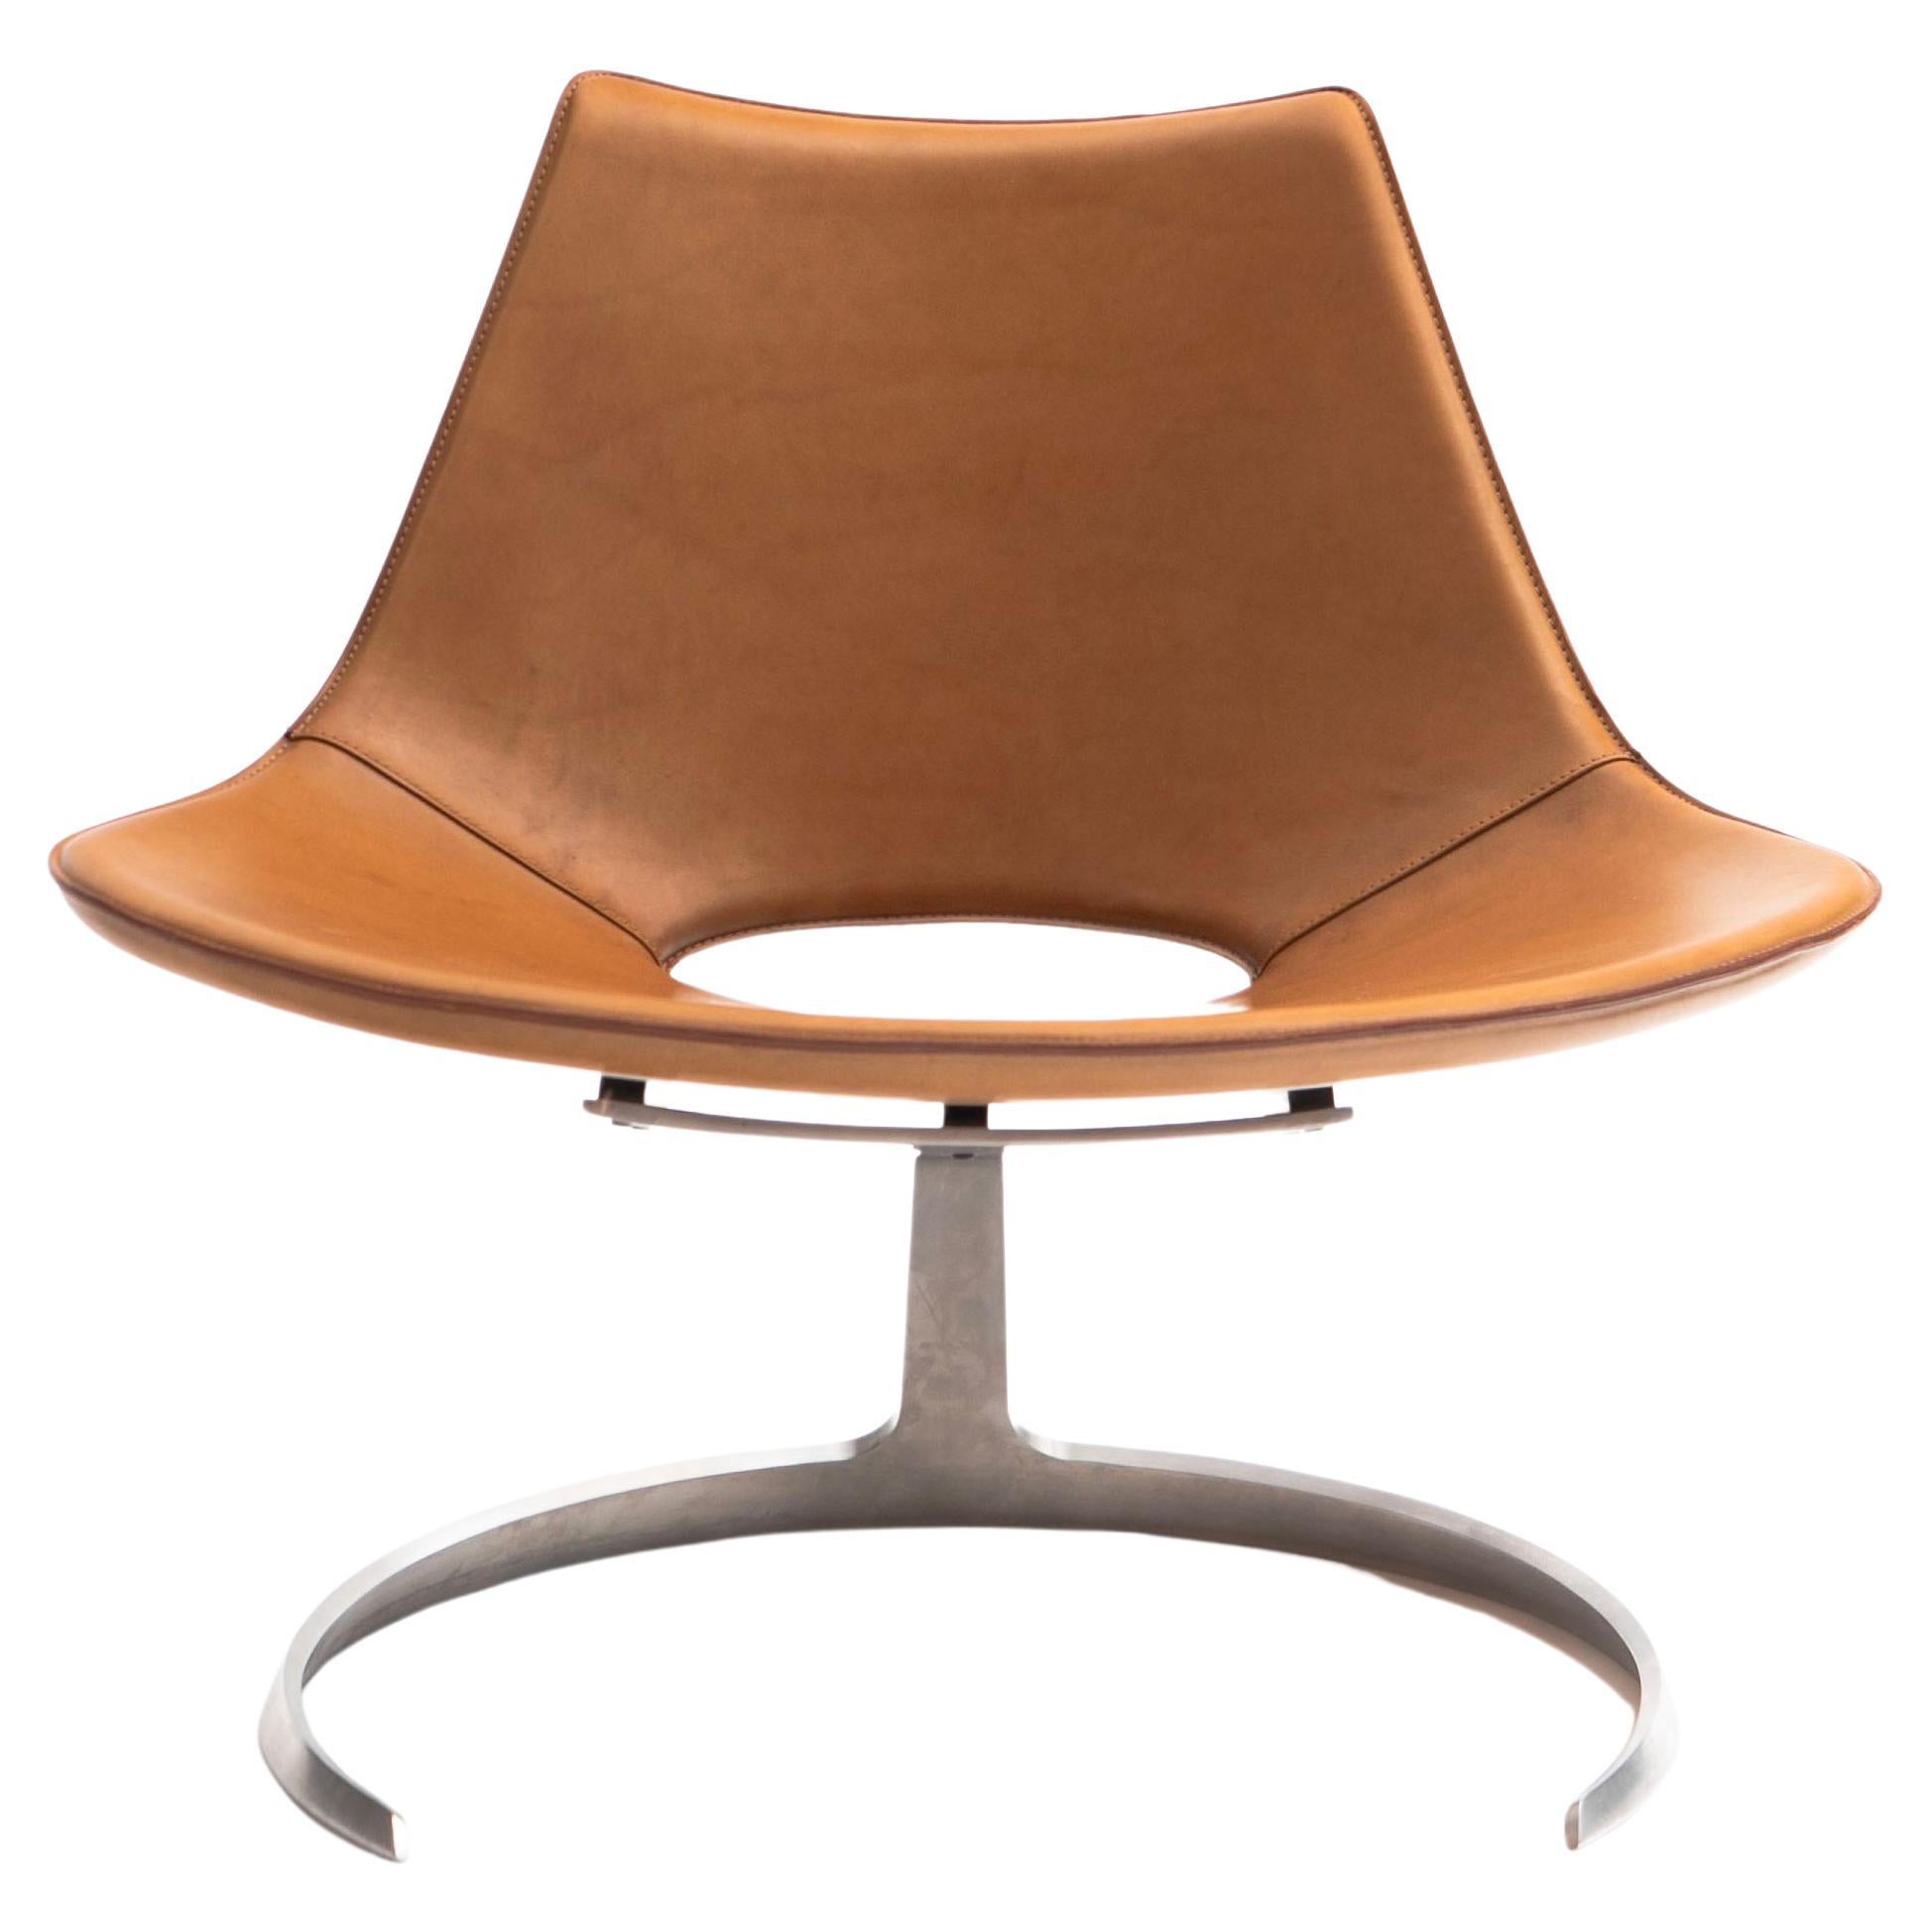 Fabricius and Kastholm 'Scimitar' Lounge Chair in Cognac Leather For Sale